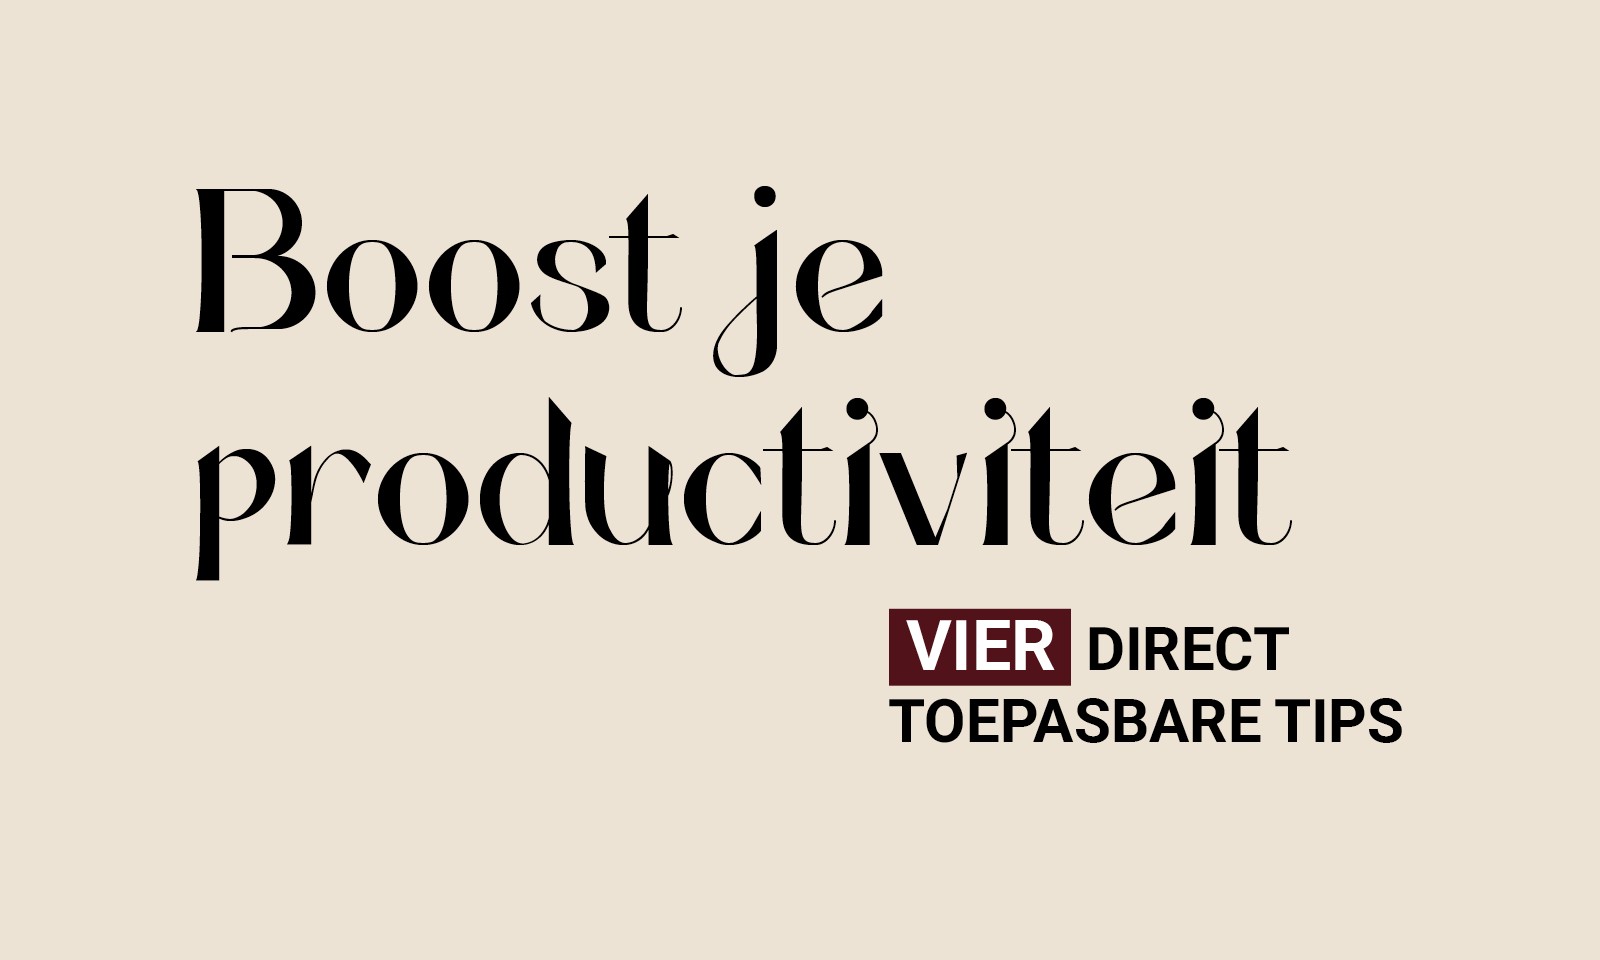 Boost je productiviteit: vier direct toepasbare tips